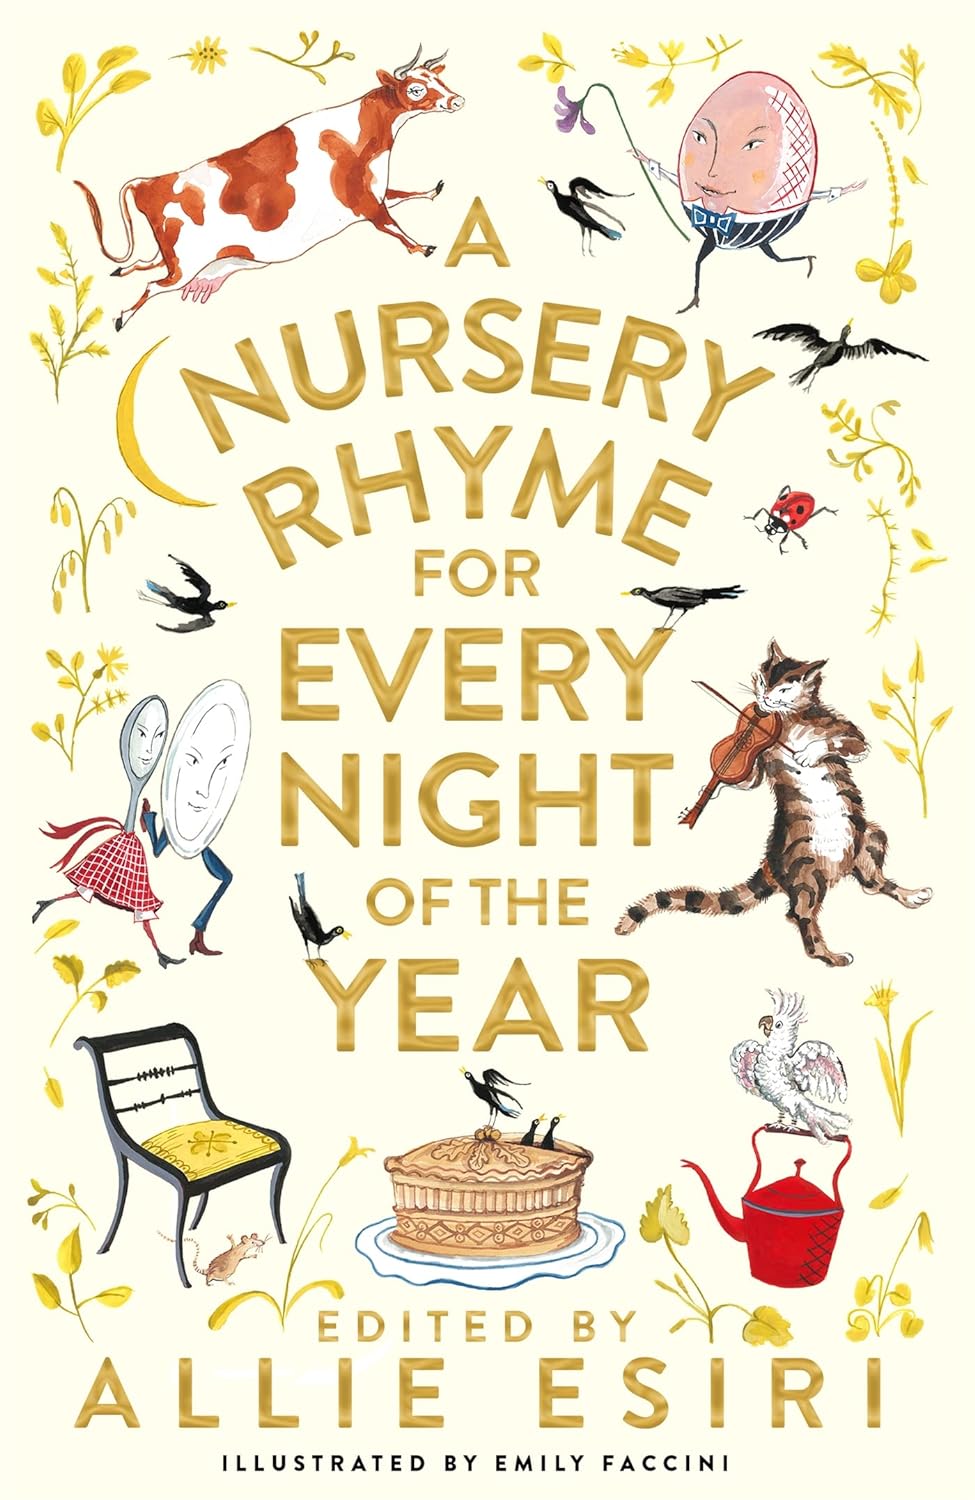 Allie Esiri: A Nursery Rhyme for Every Night of the Year, illustrated by Emily Faccini